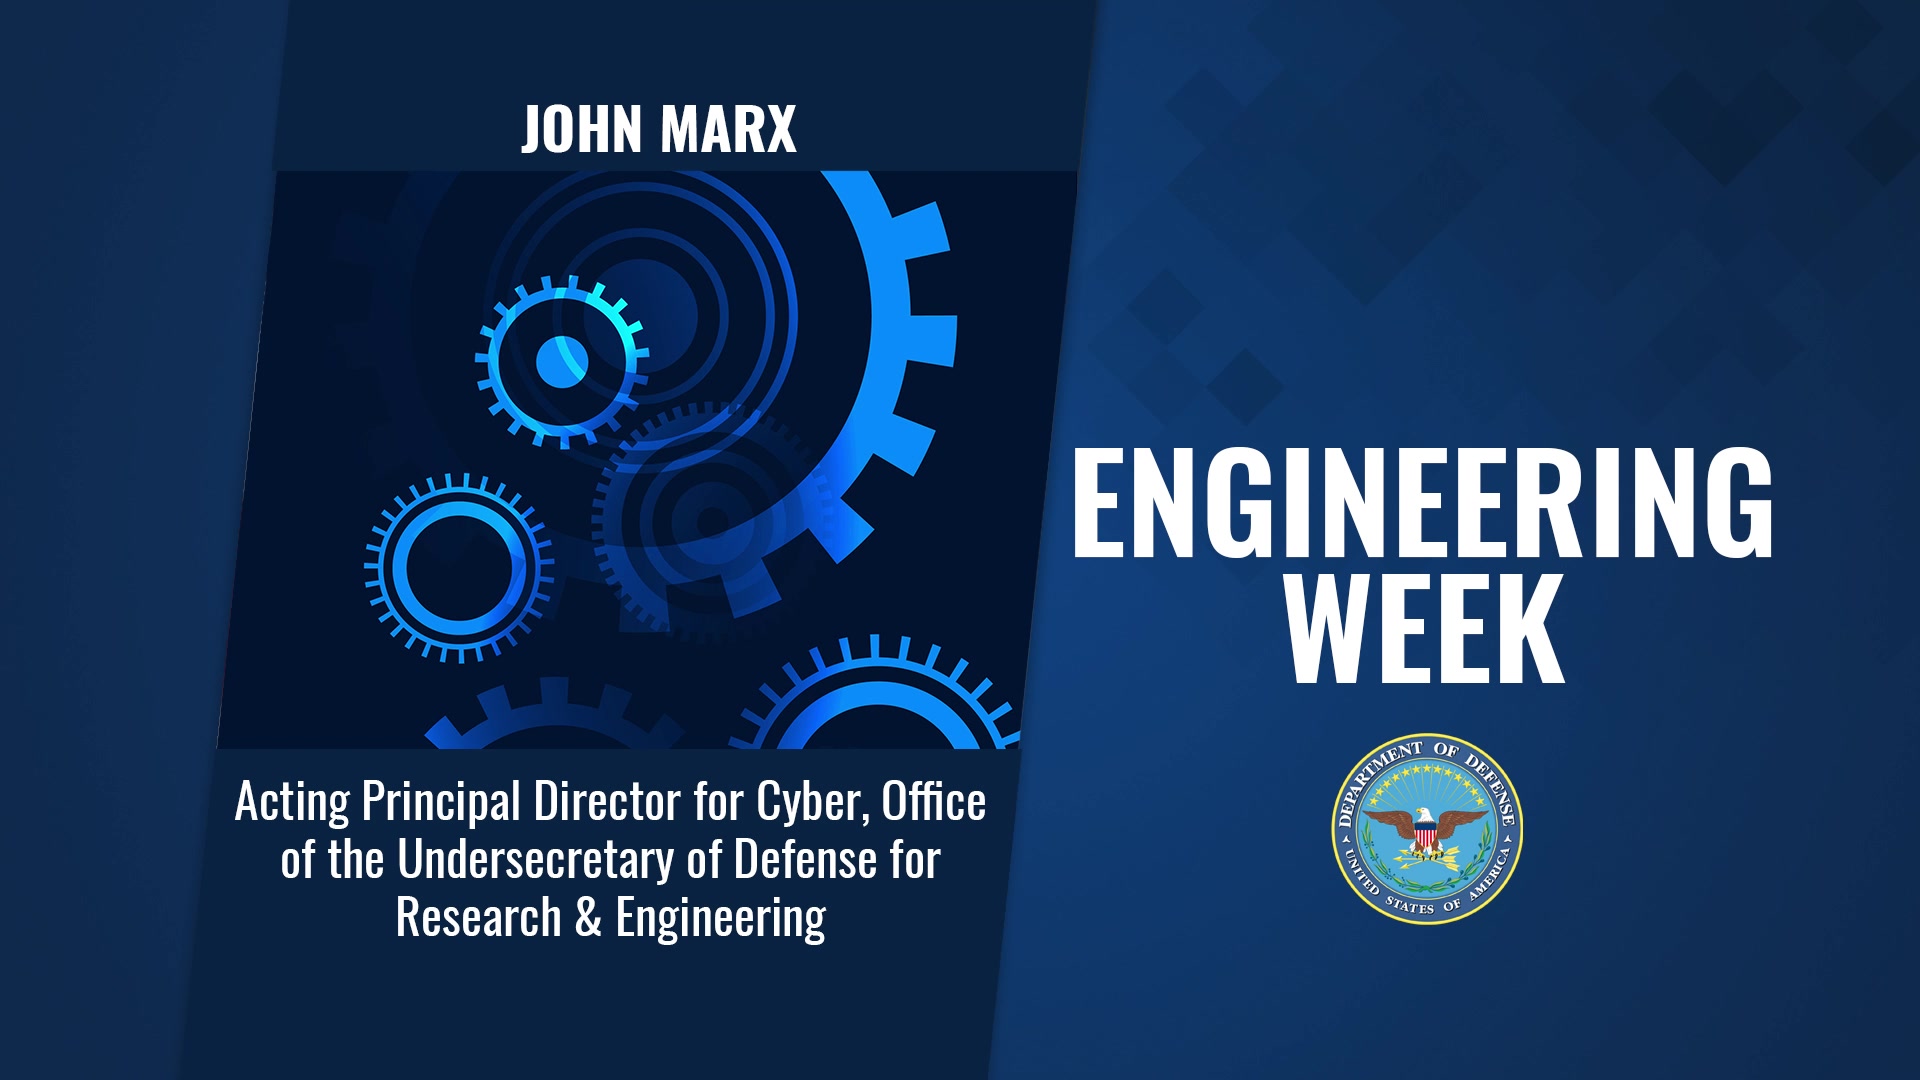 John Marx, acting principal director for cyber modernization in the office of the undersecretary of defense for research and engineering, explains the importance of cyber to national security and the workforce during Engineers Week, which runs Feb. 21-27.